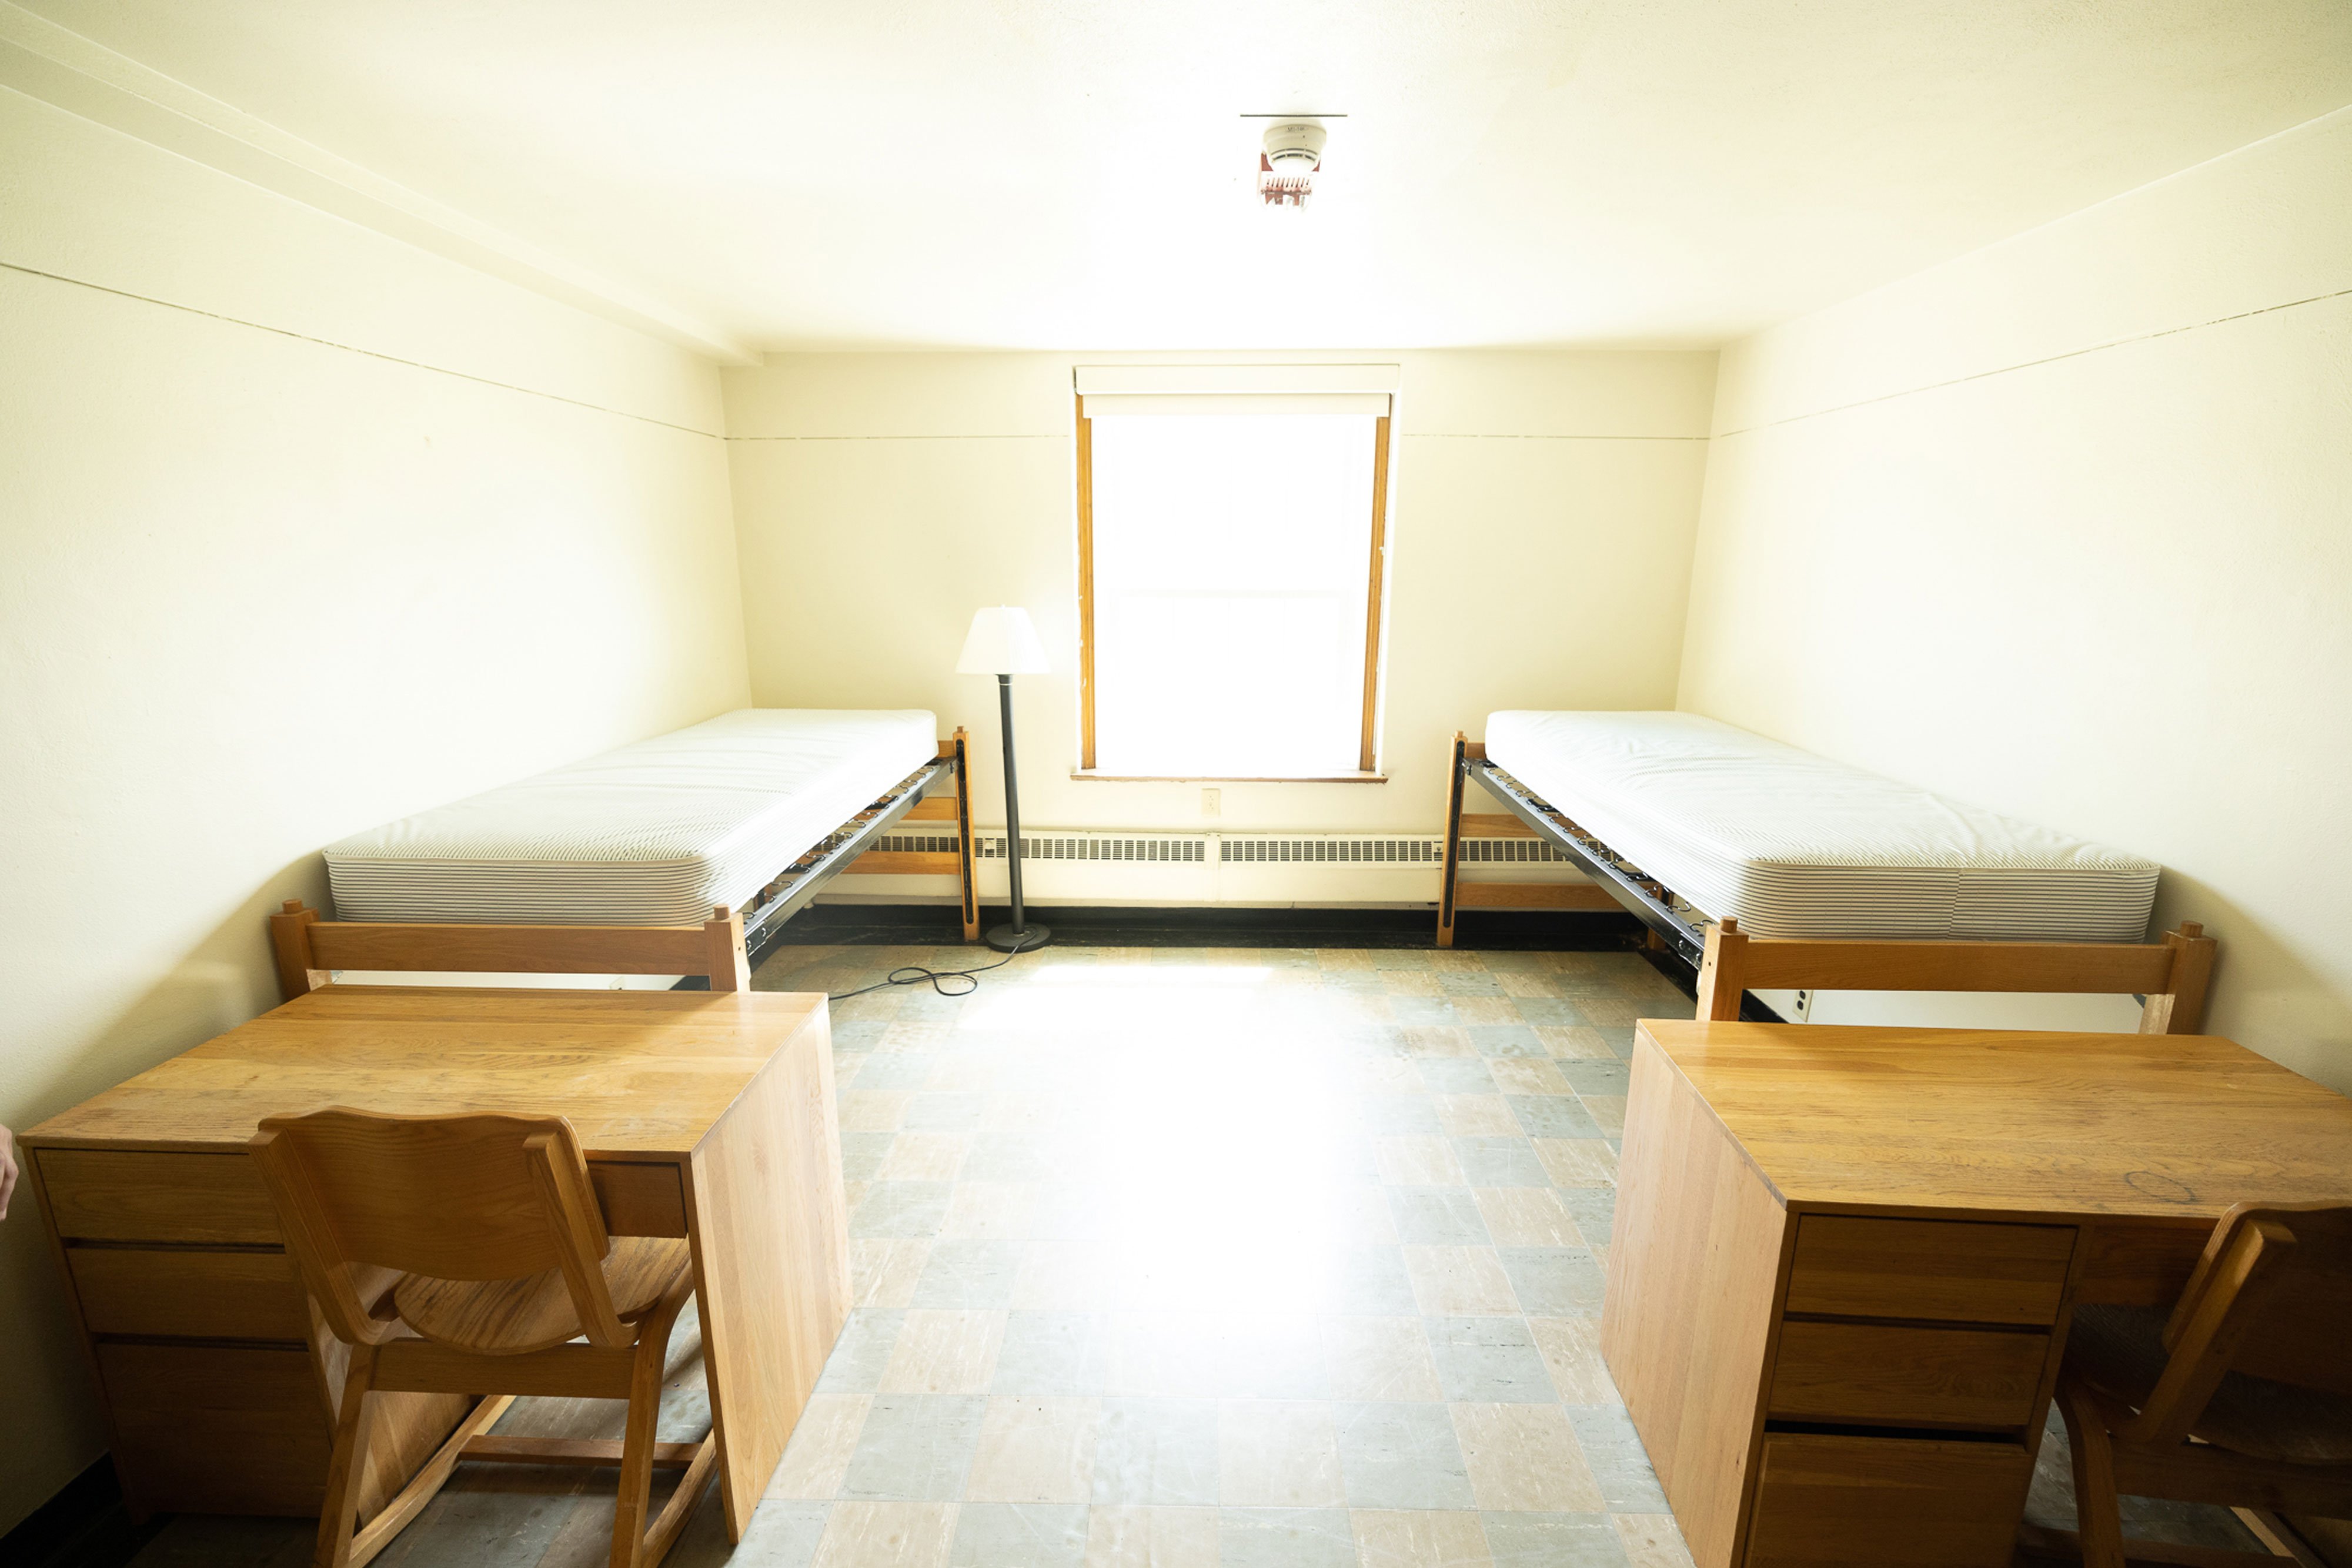 A double bedroom inside Alumni Quad, with two twin beds, two desks and two chairs.